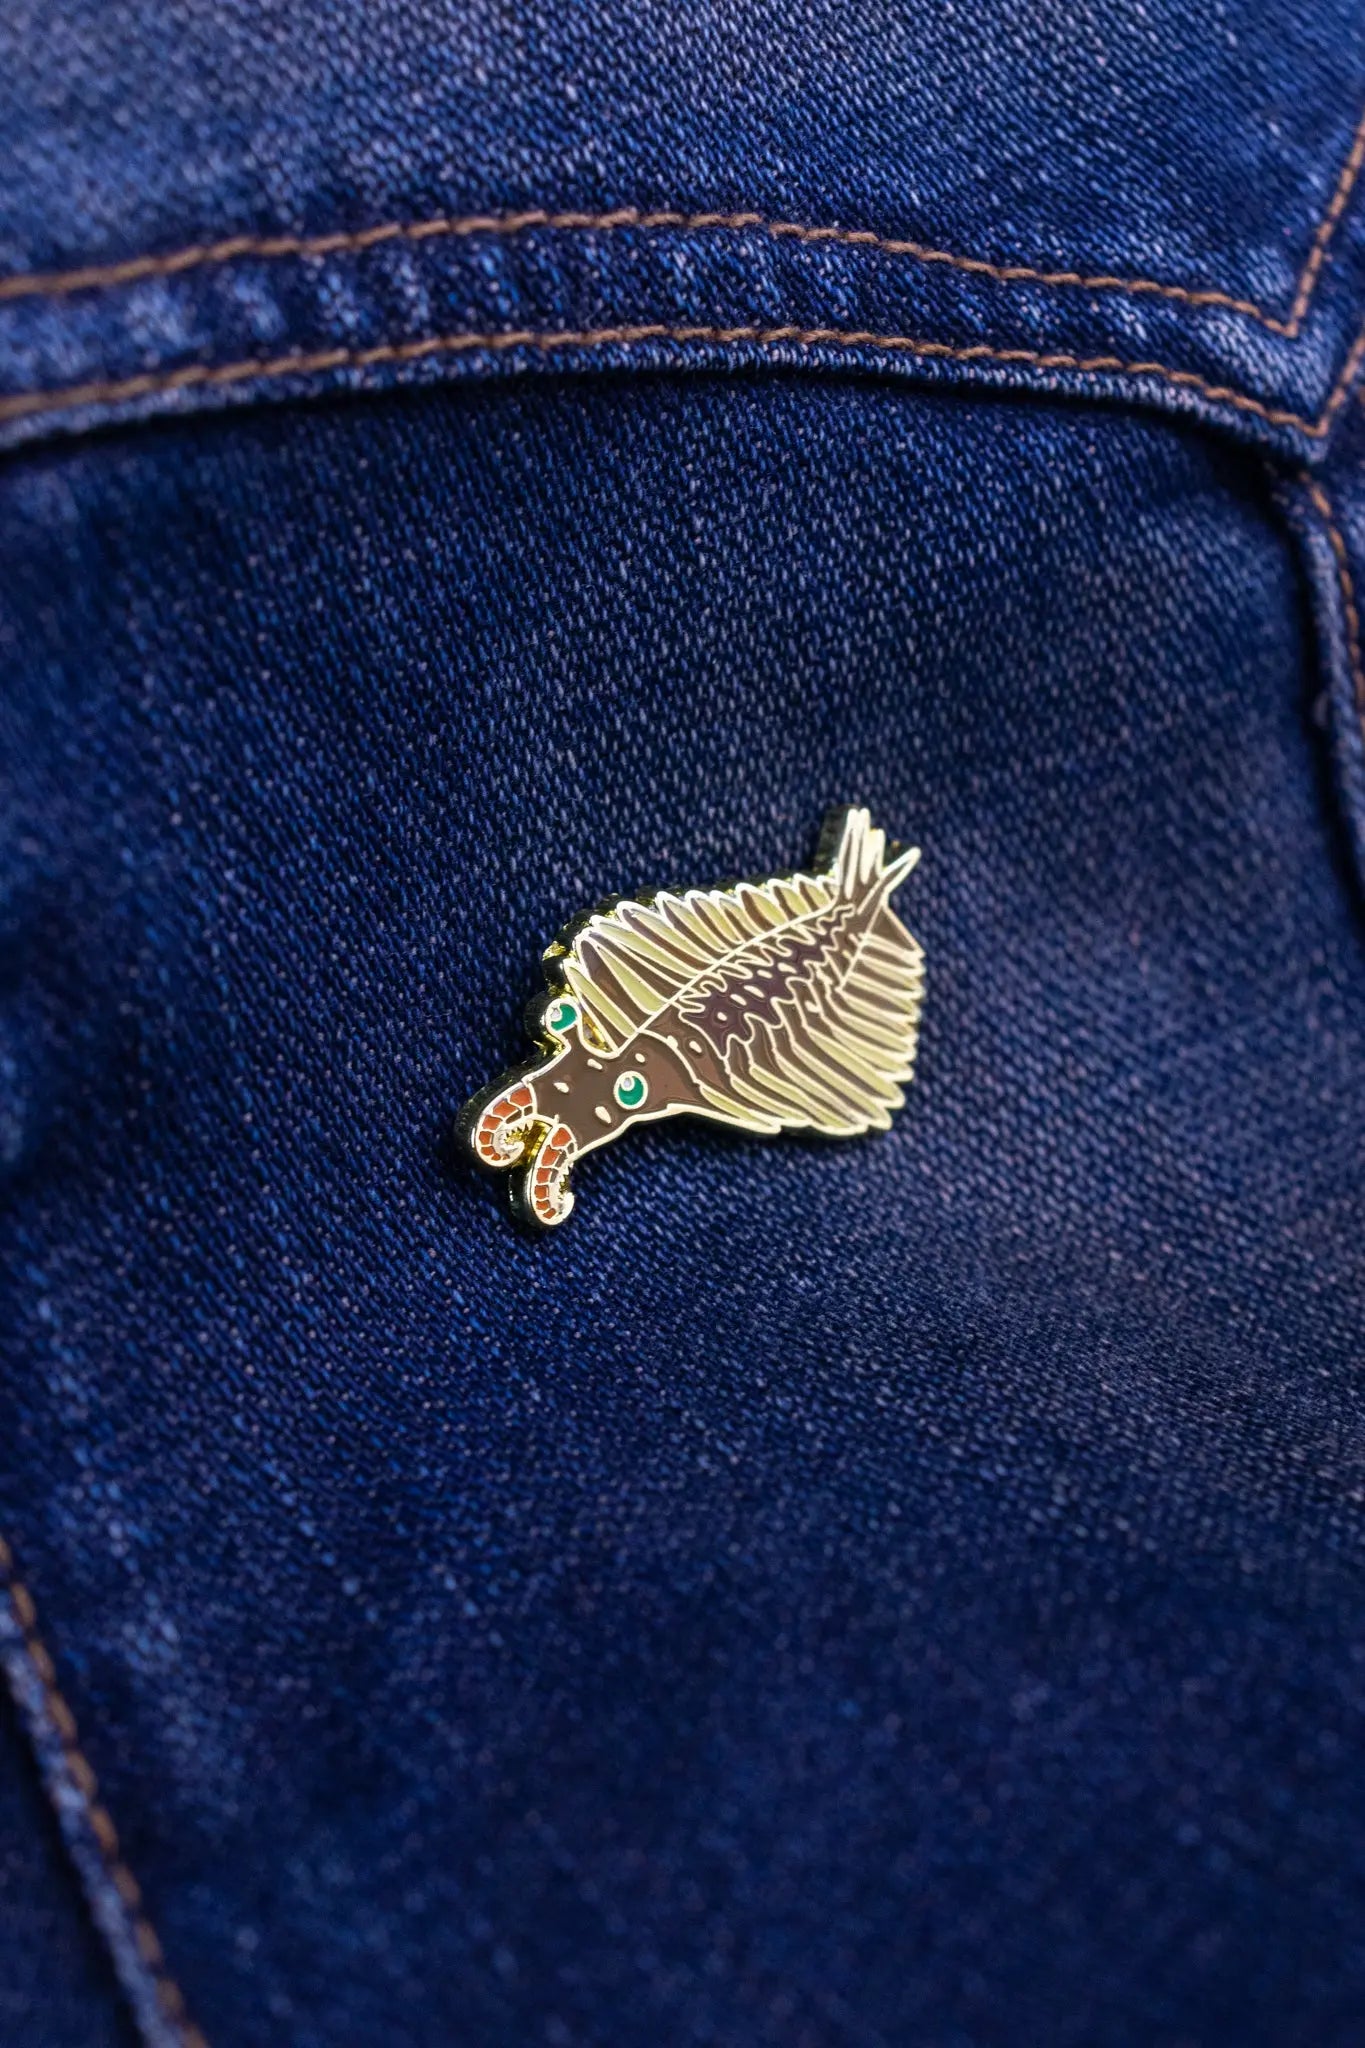 Anomalocaris Pin - Stemcell Science Shop